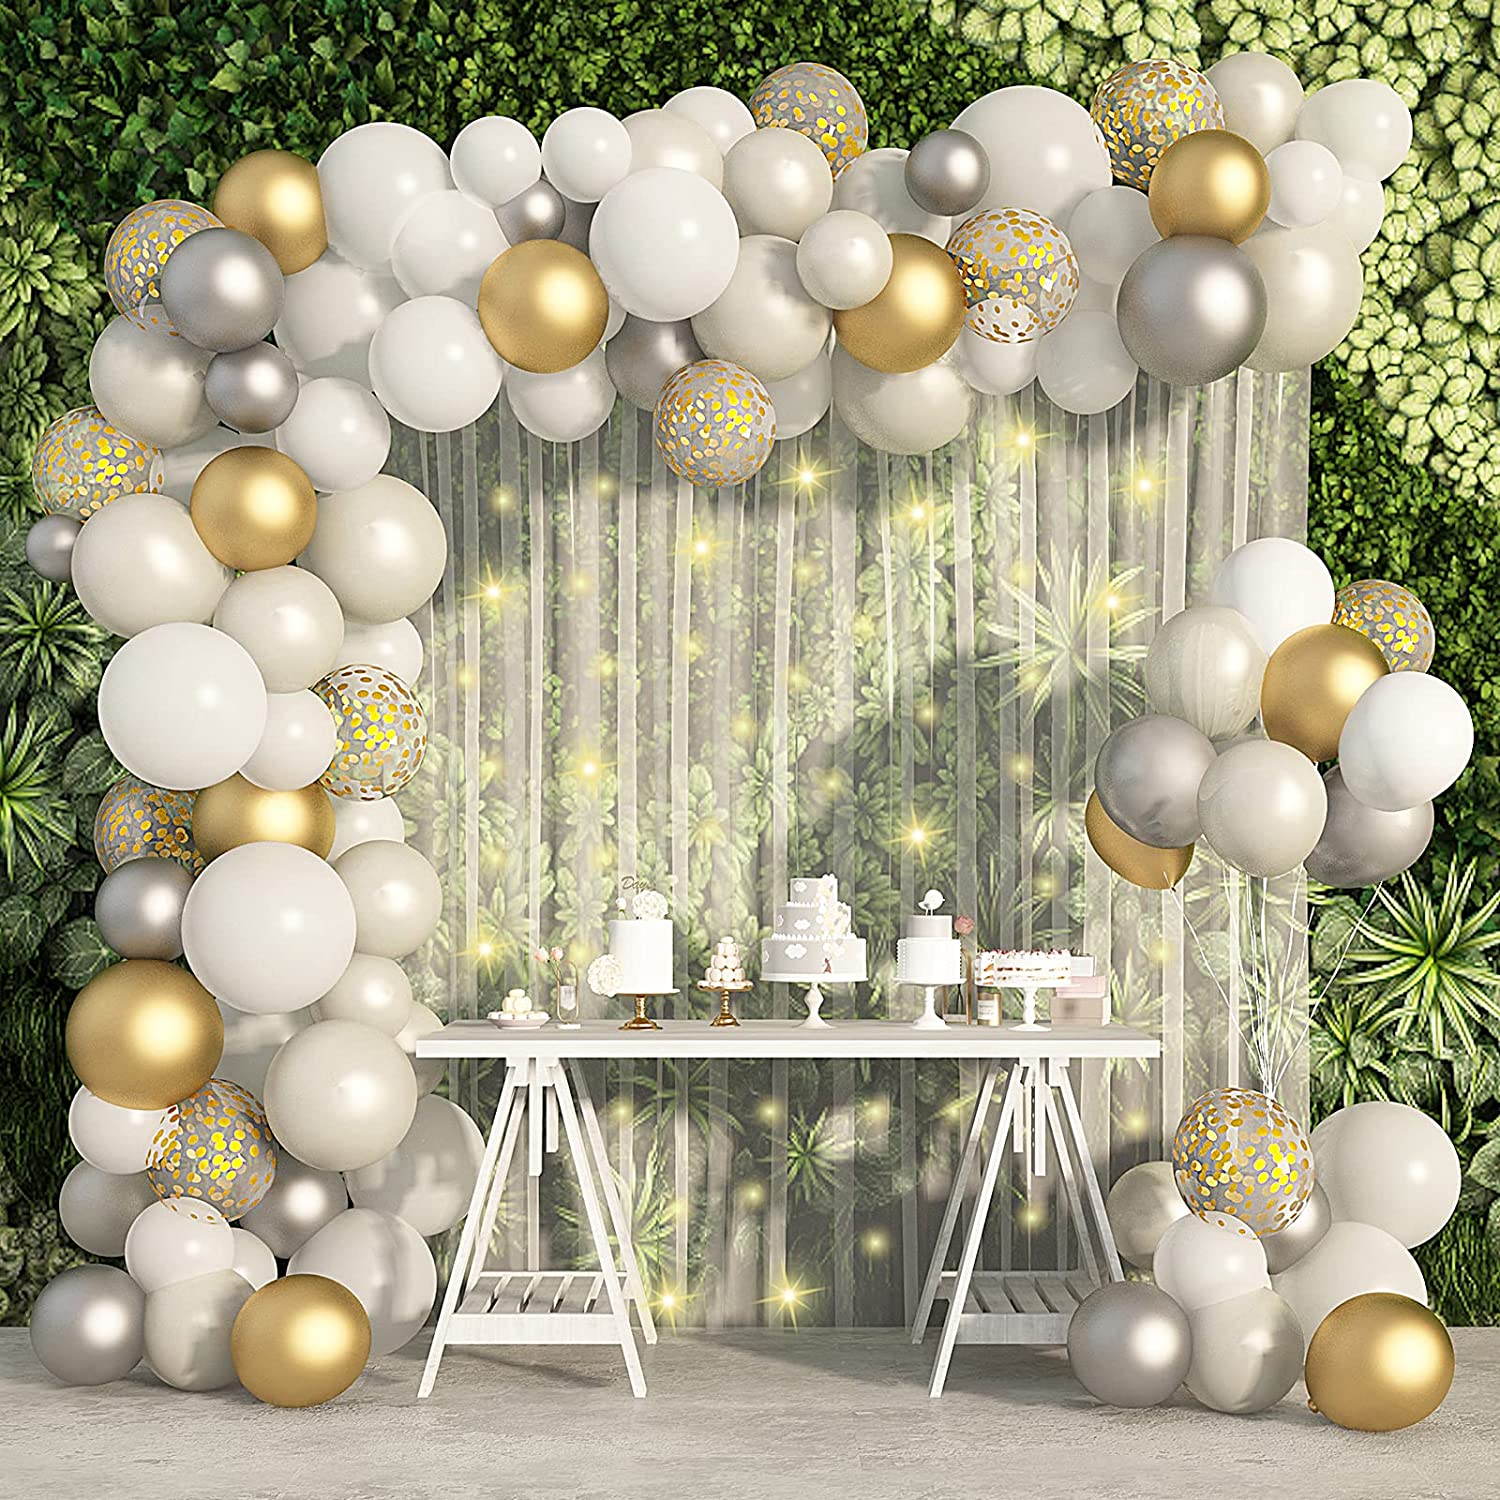 Gold White Balloon Garland Arch Kit with String Lights White Yarn Backdrop, Silver White Gold Confetti Metallic Latex Balloons